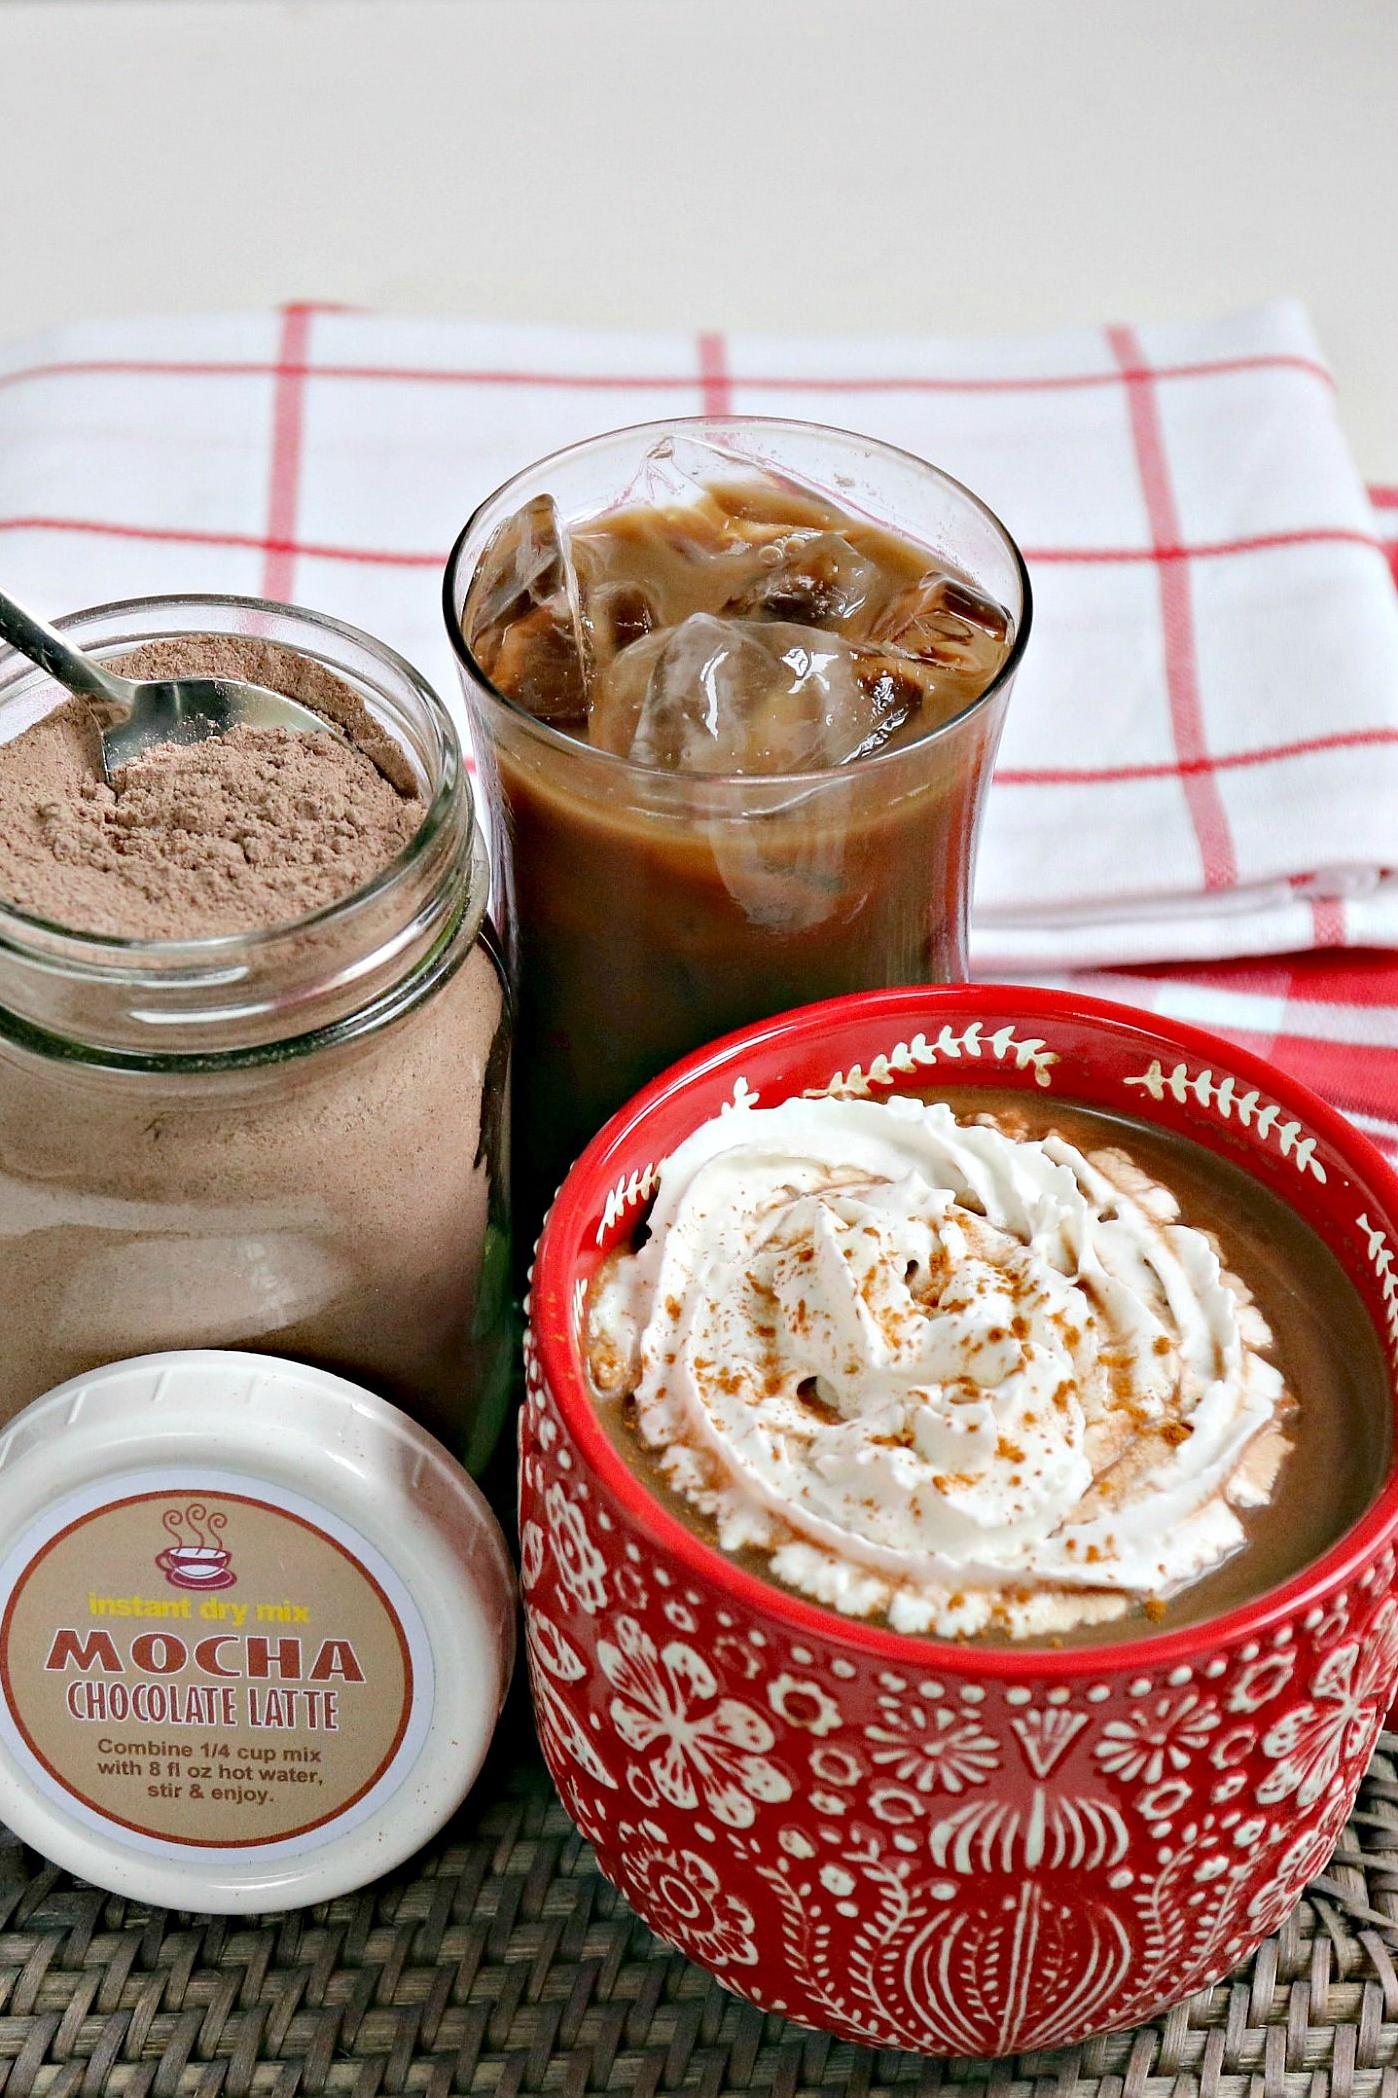  Savor every sip of this rich and chocolatey coffee treat.